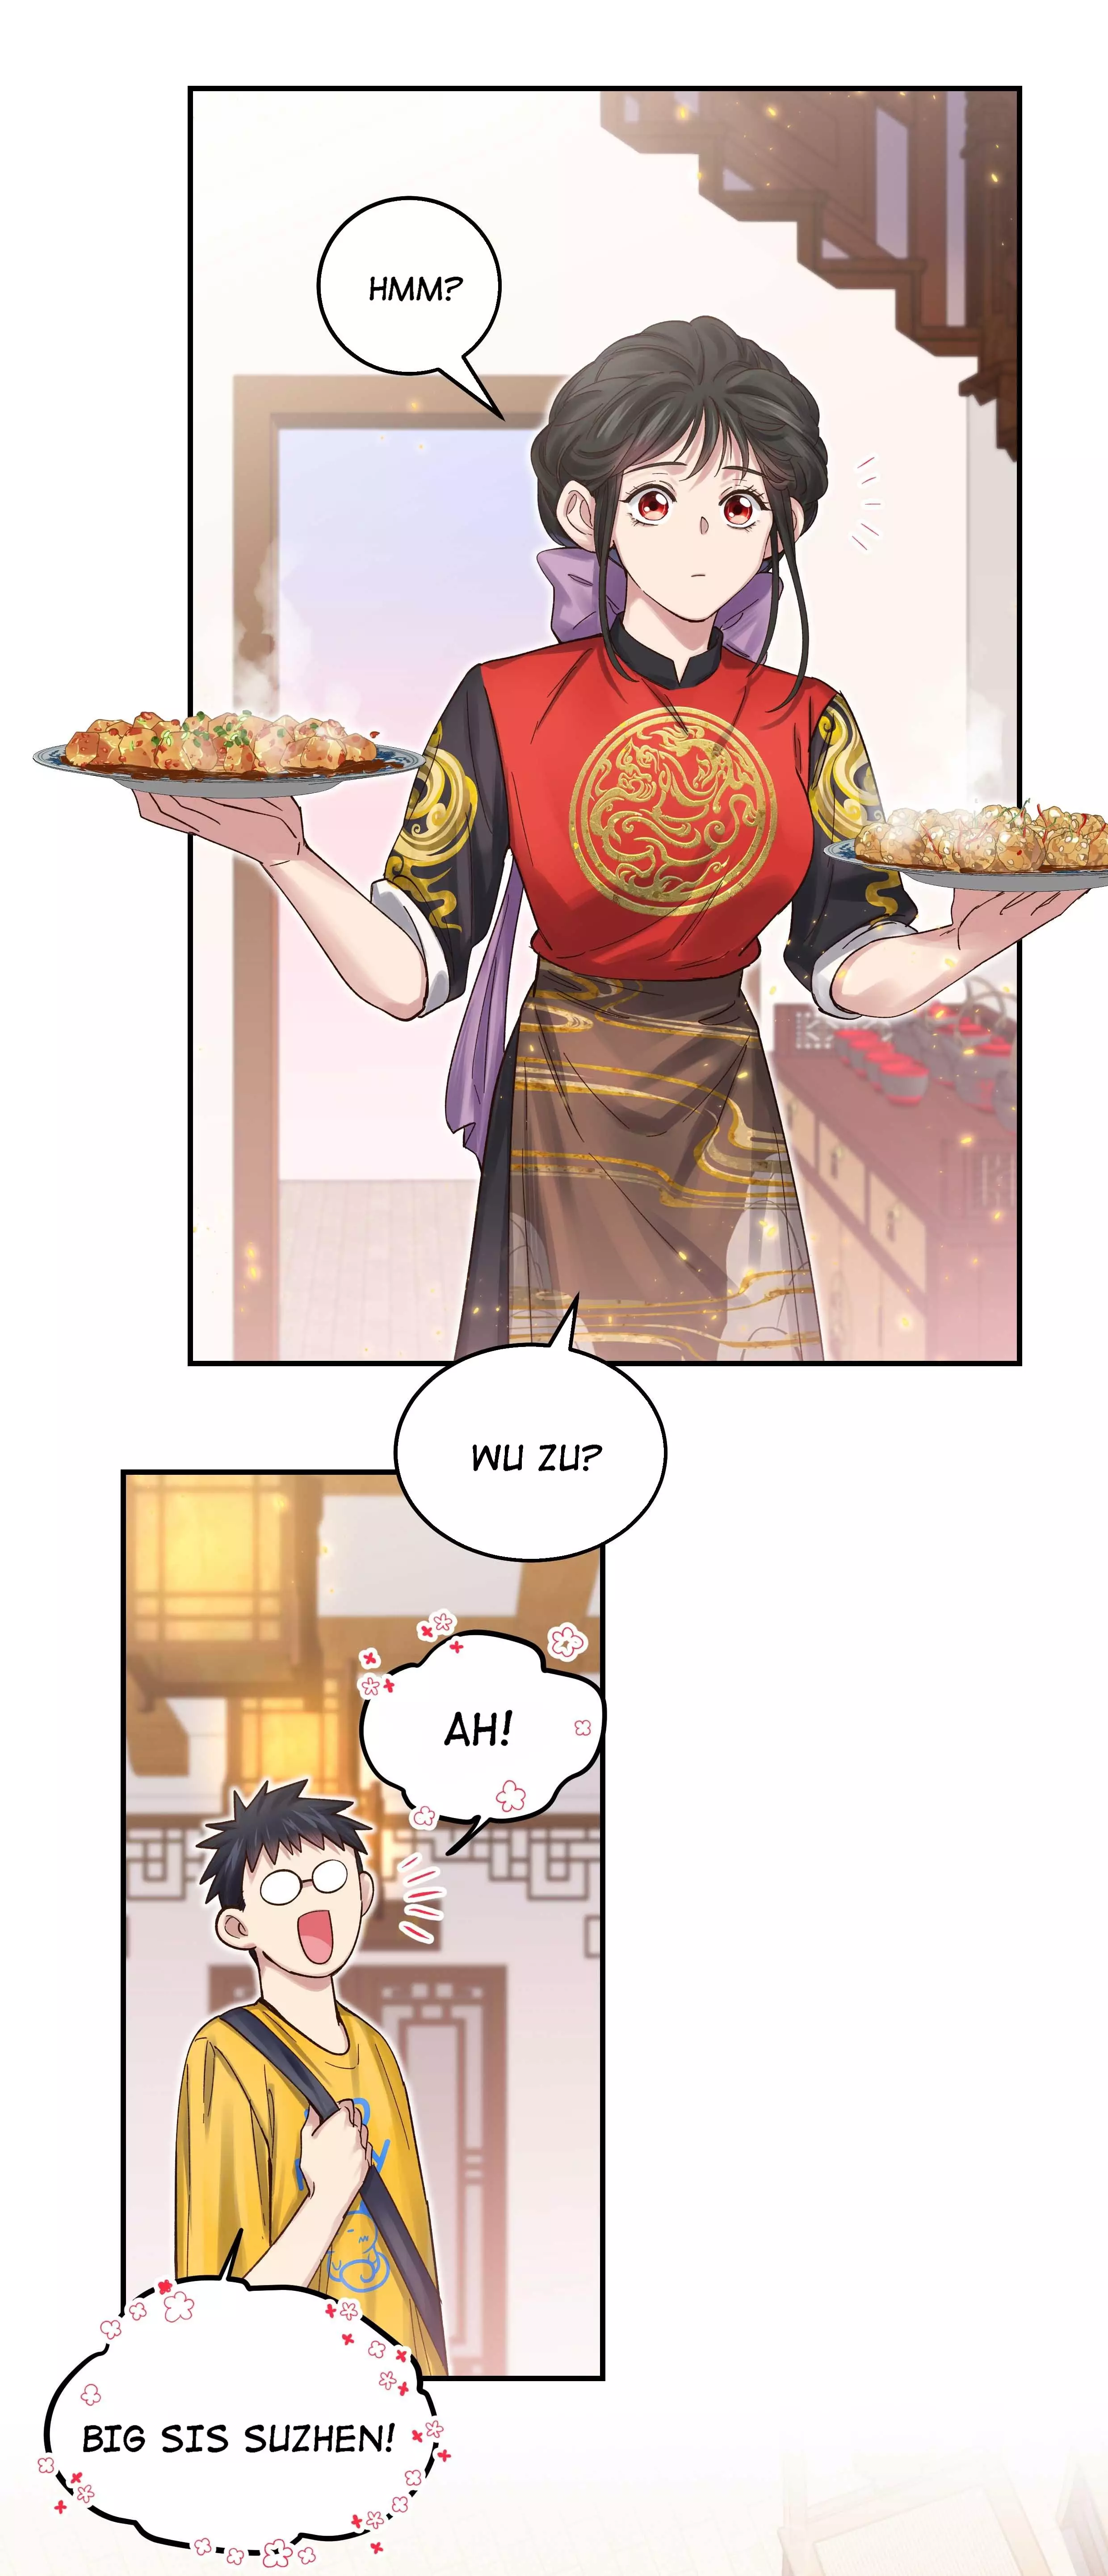 Pixiu's Eatery, No Way Out - 71 page 16-91c33d6a